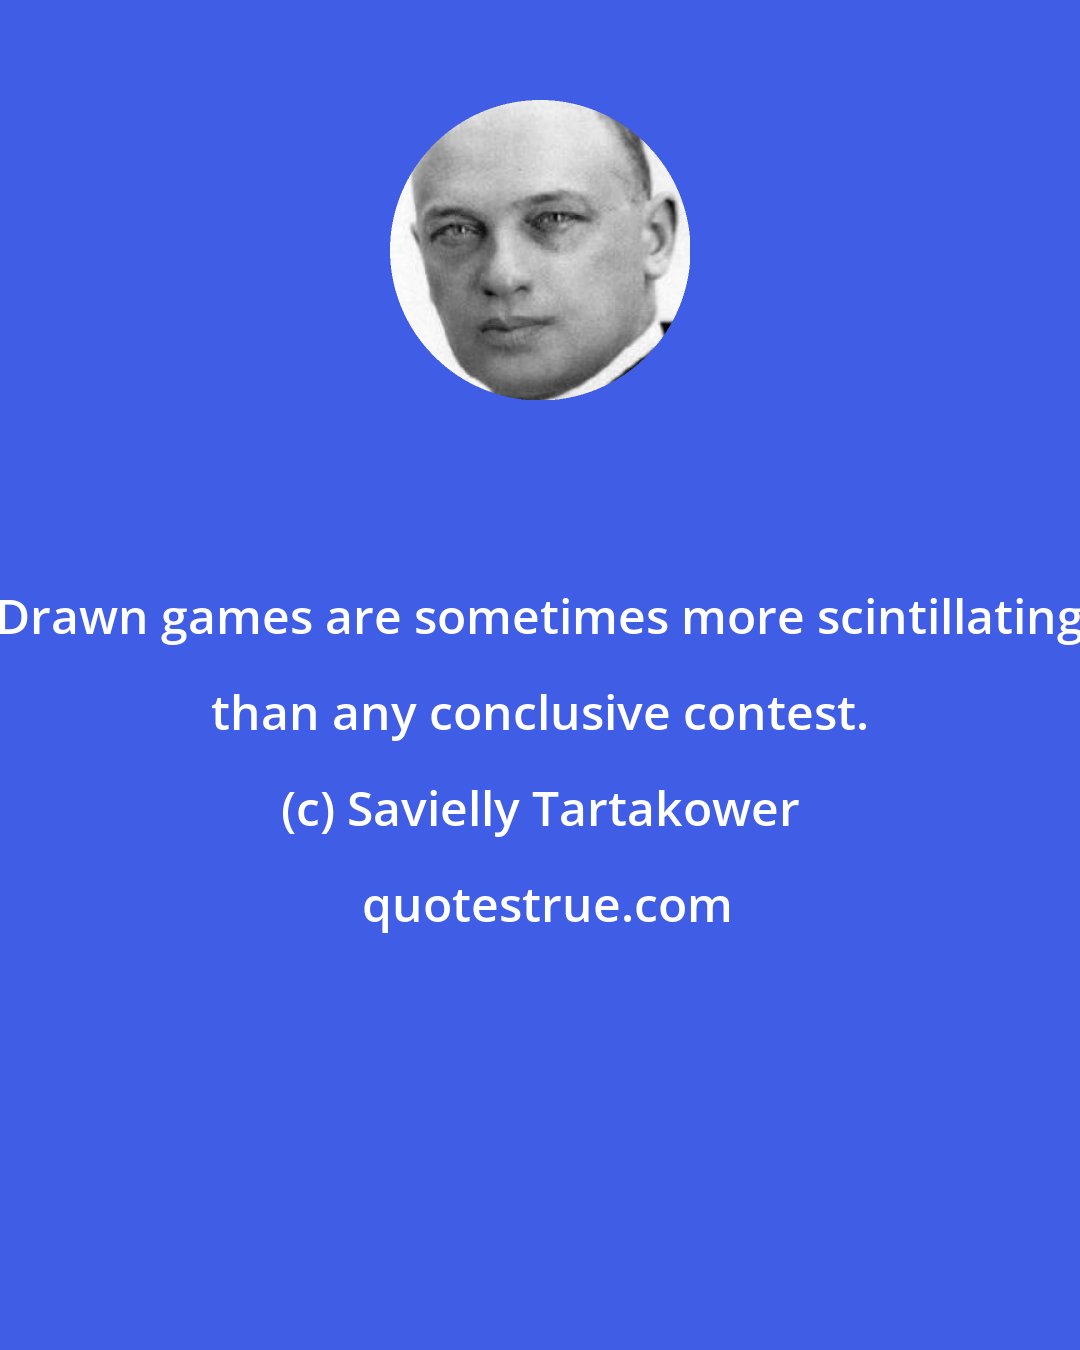 Savielly Tartakower: Drawn games are sometimes more scintillating than any conclusive contest.